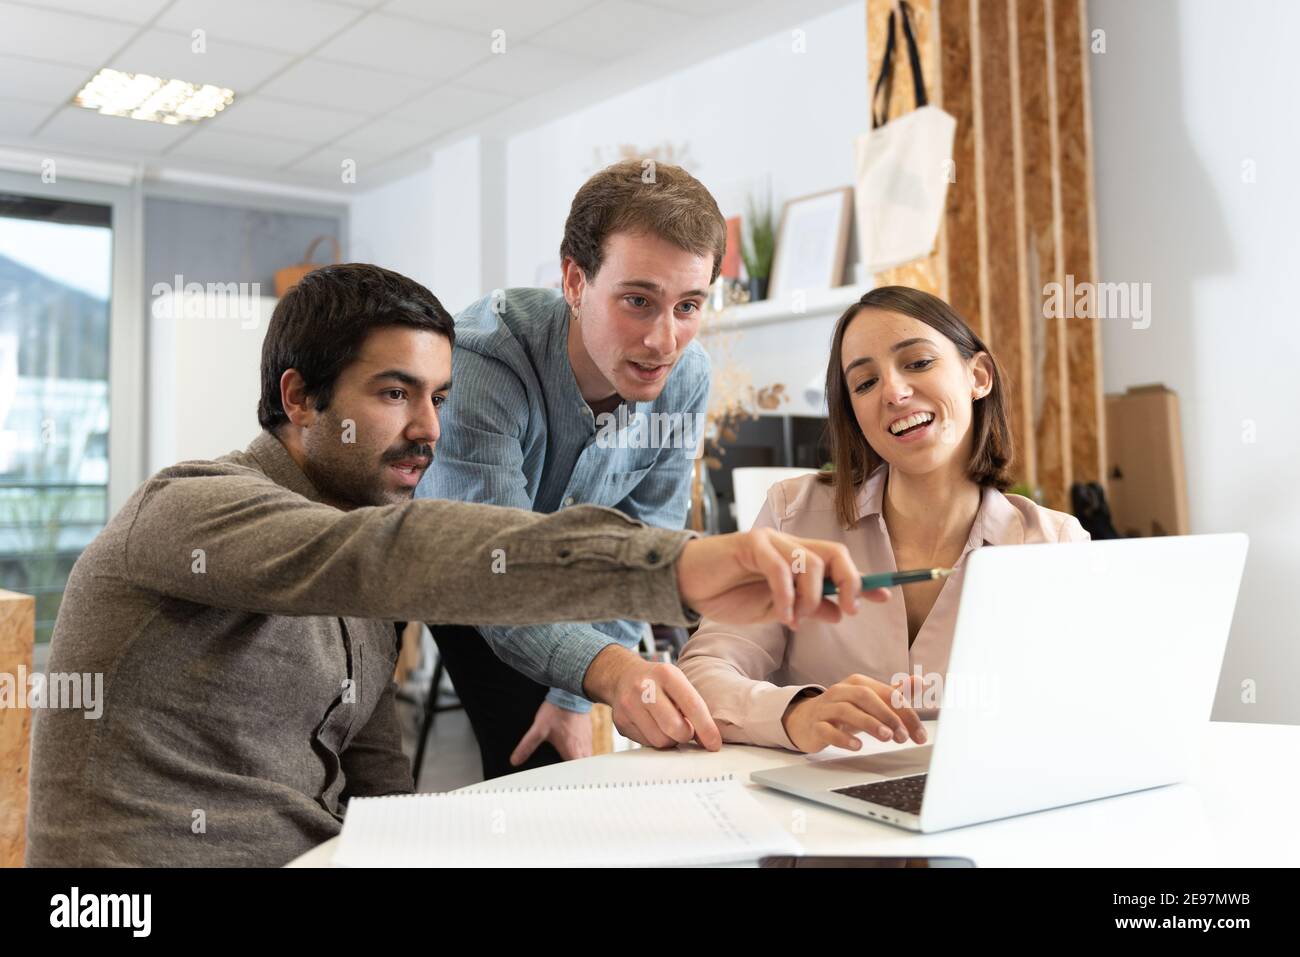 Three coworkers discussing and looking to a laptop. Stock Photo